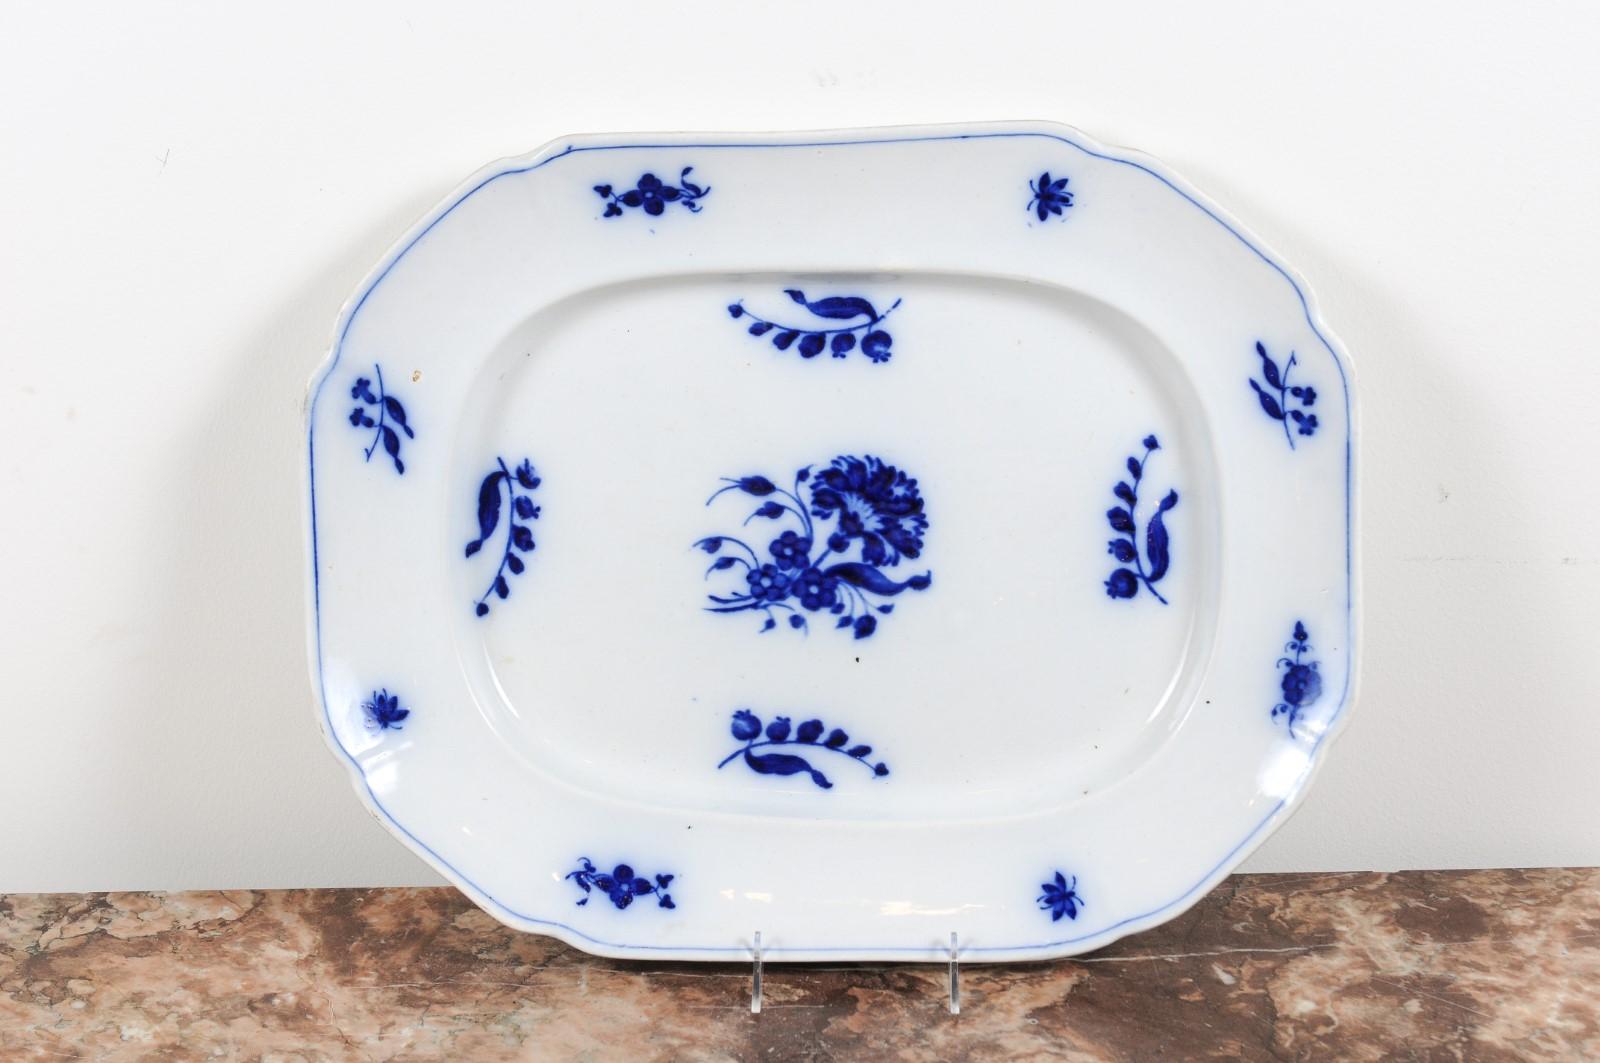 An English blue and white platter from the 19th century, with floral decor. Born in England during the 19th century, this platter features blue floral motifs standing out on a white ground. Presenting a slightly scalloped edge highlighted by a thin